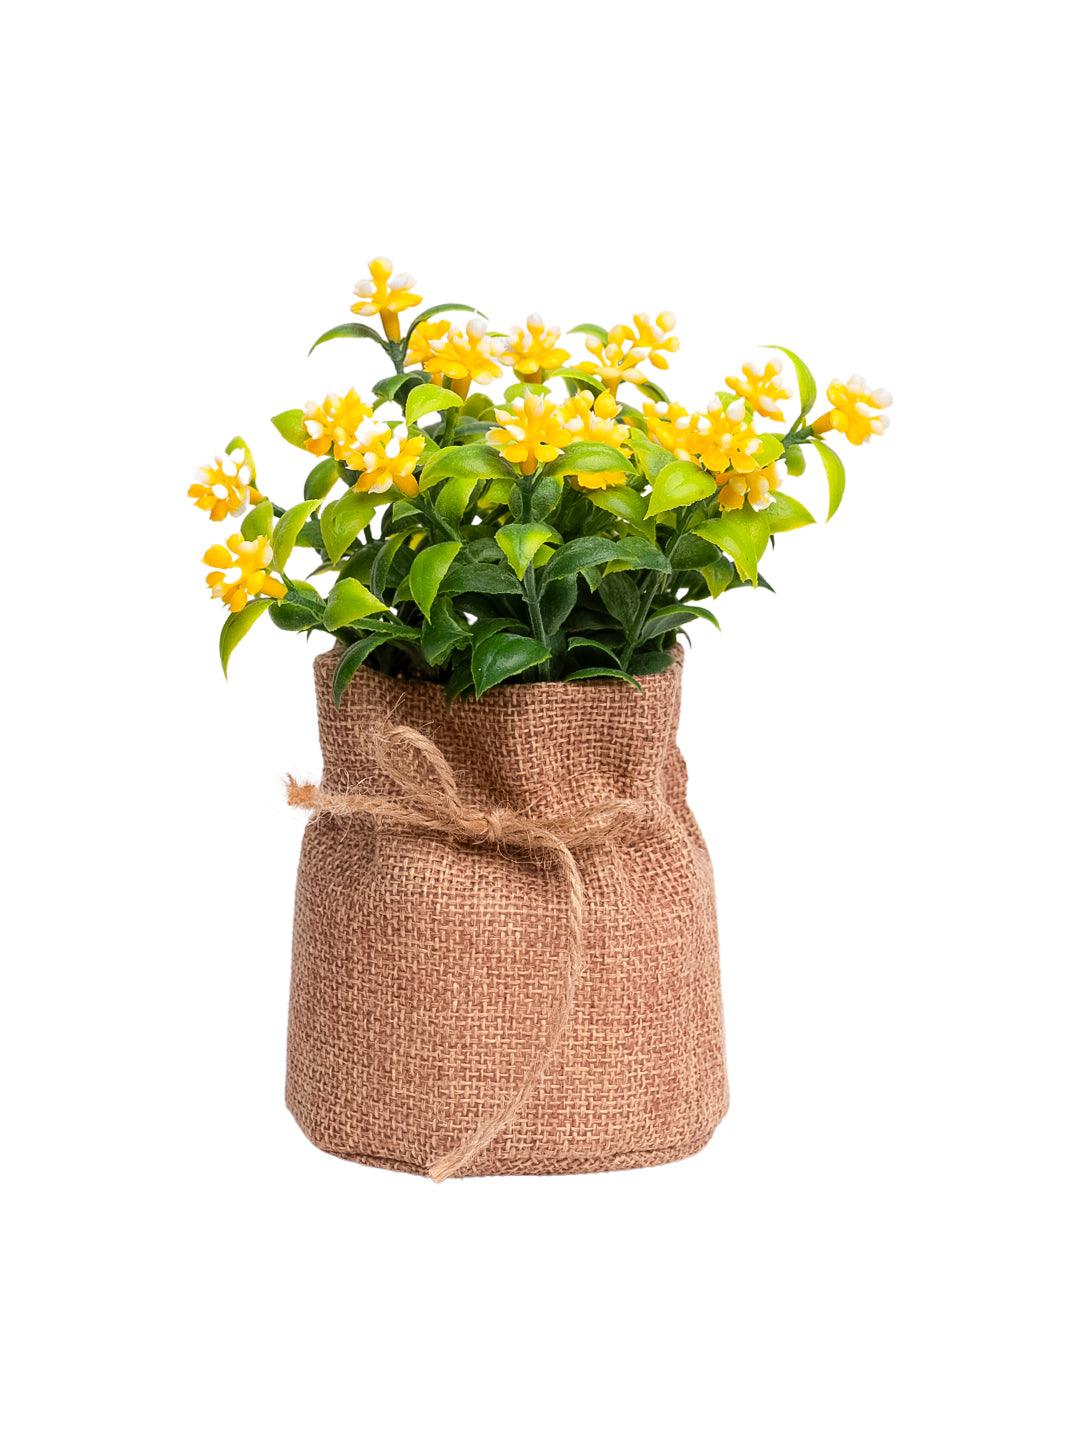 VON CASA Yellow Artificial Potted Plant - Knitted - MARKET 99